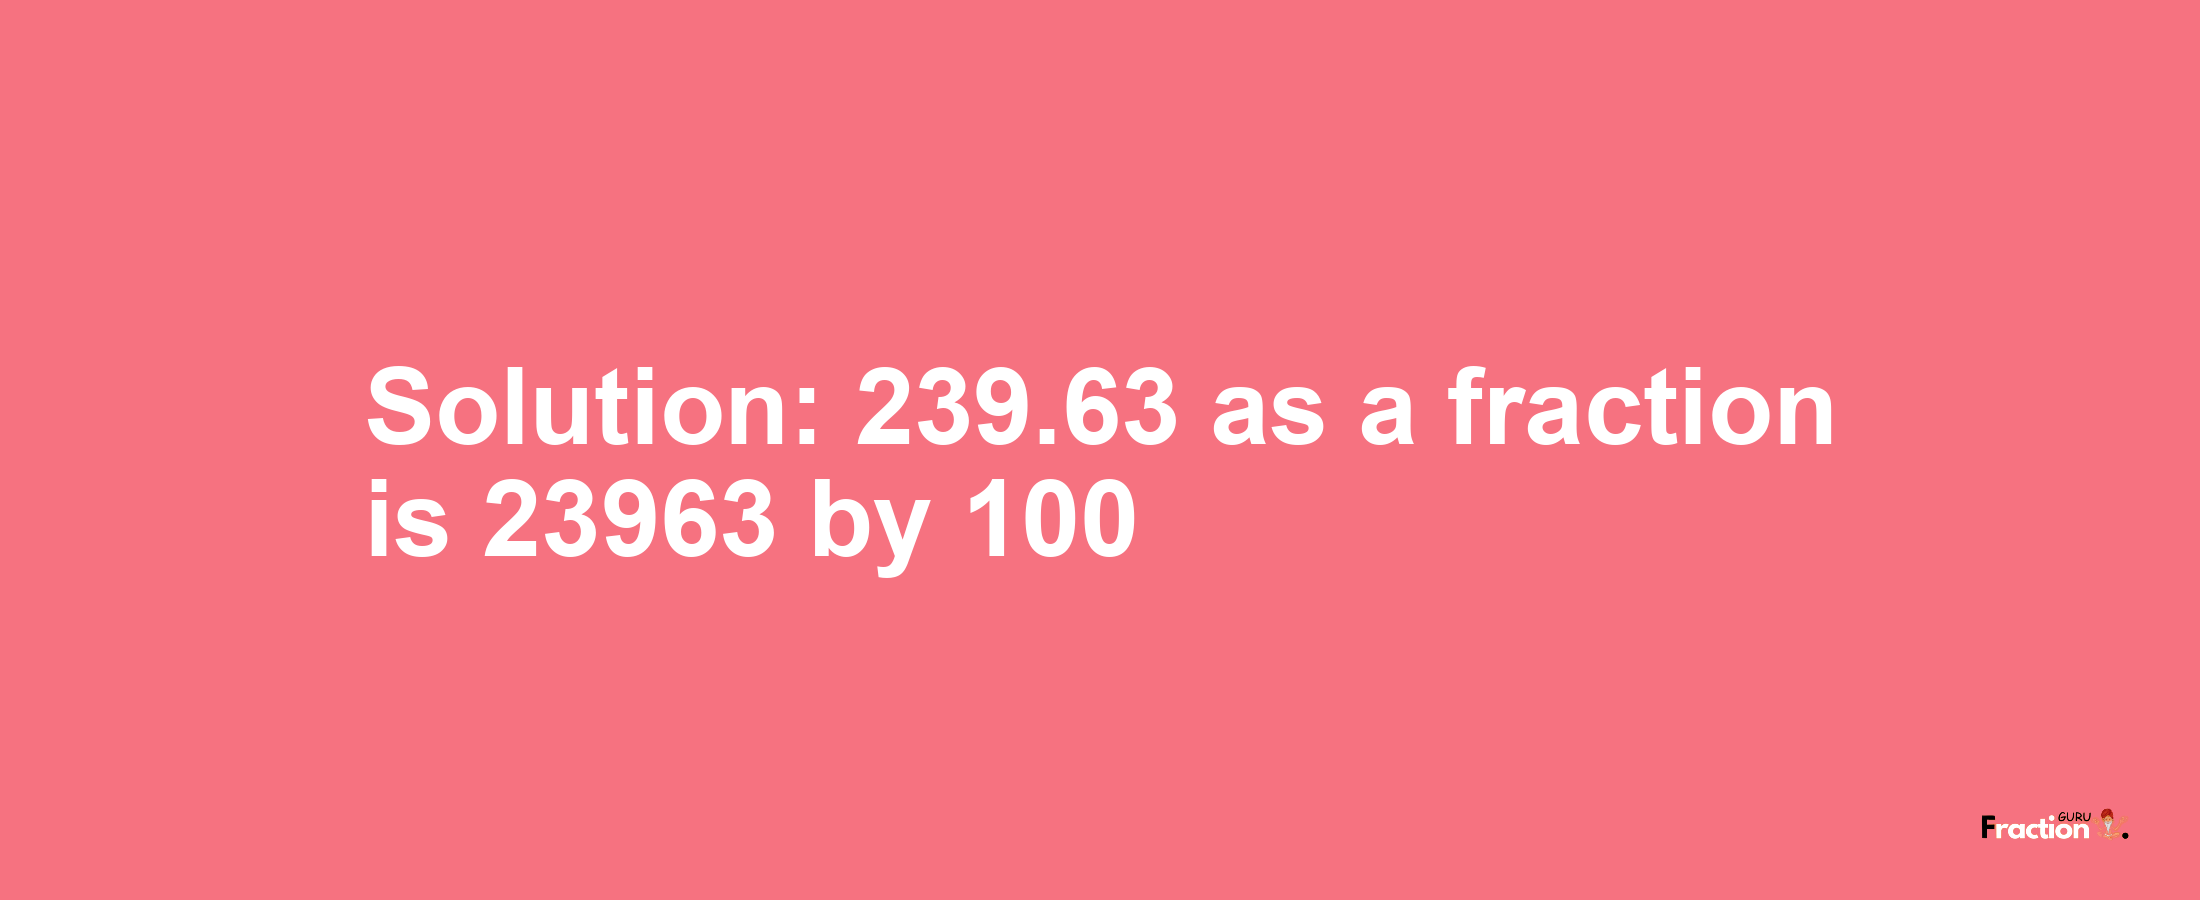 Solution:239.63 as a fraction is 23963/100